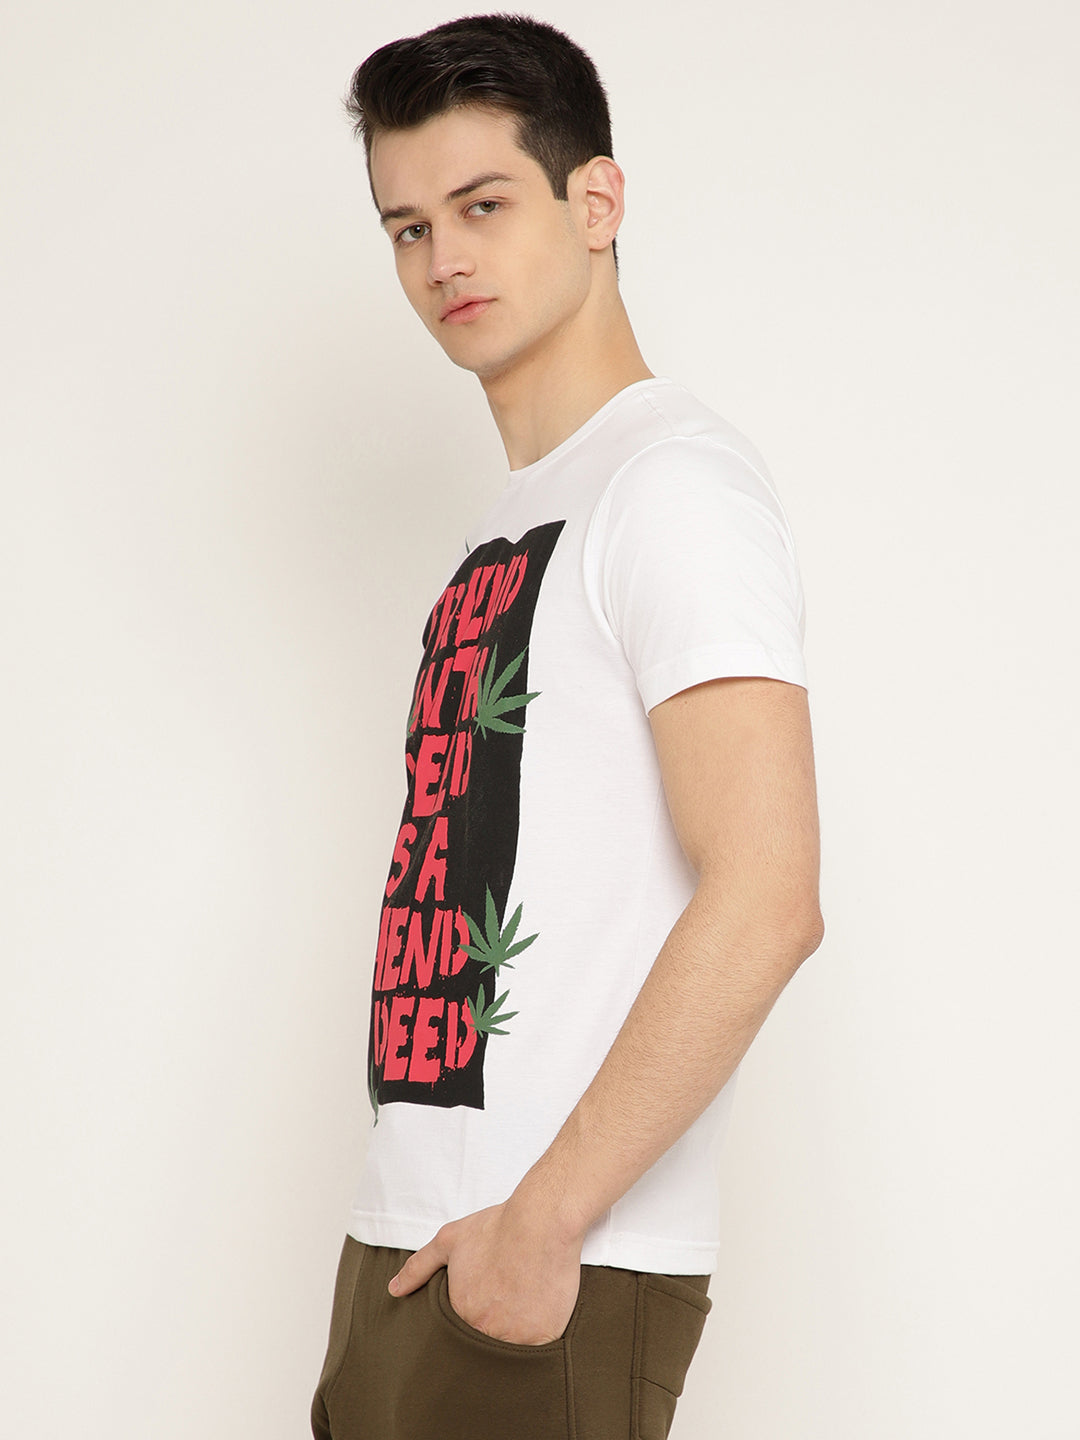 Punk FRIEND-WITH-WEED White T-Shirt